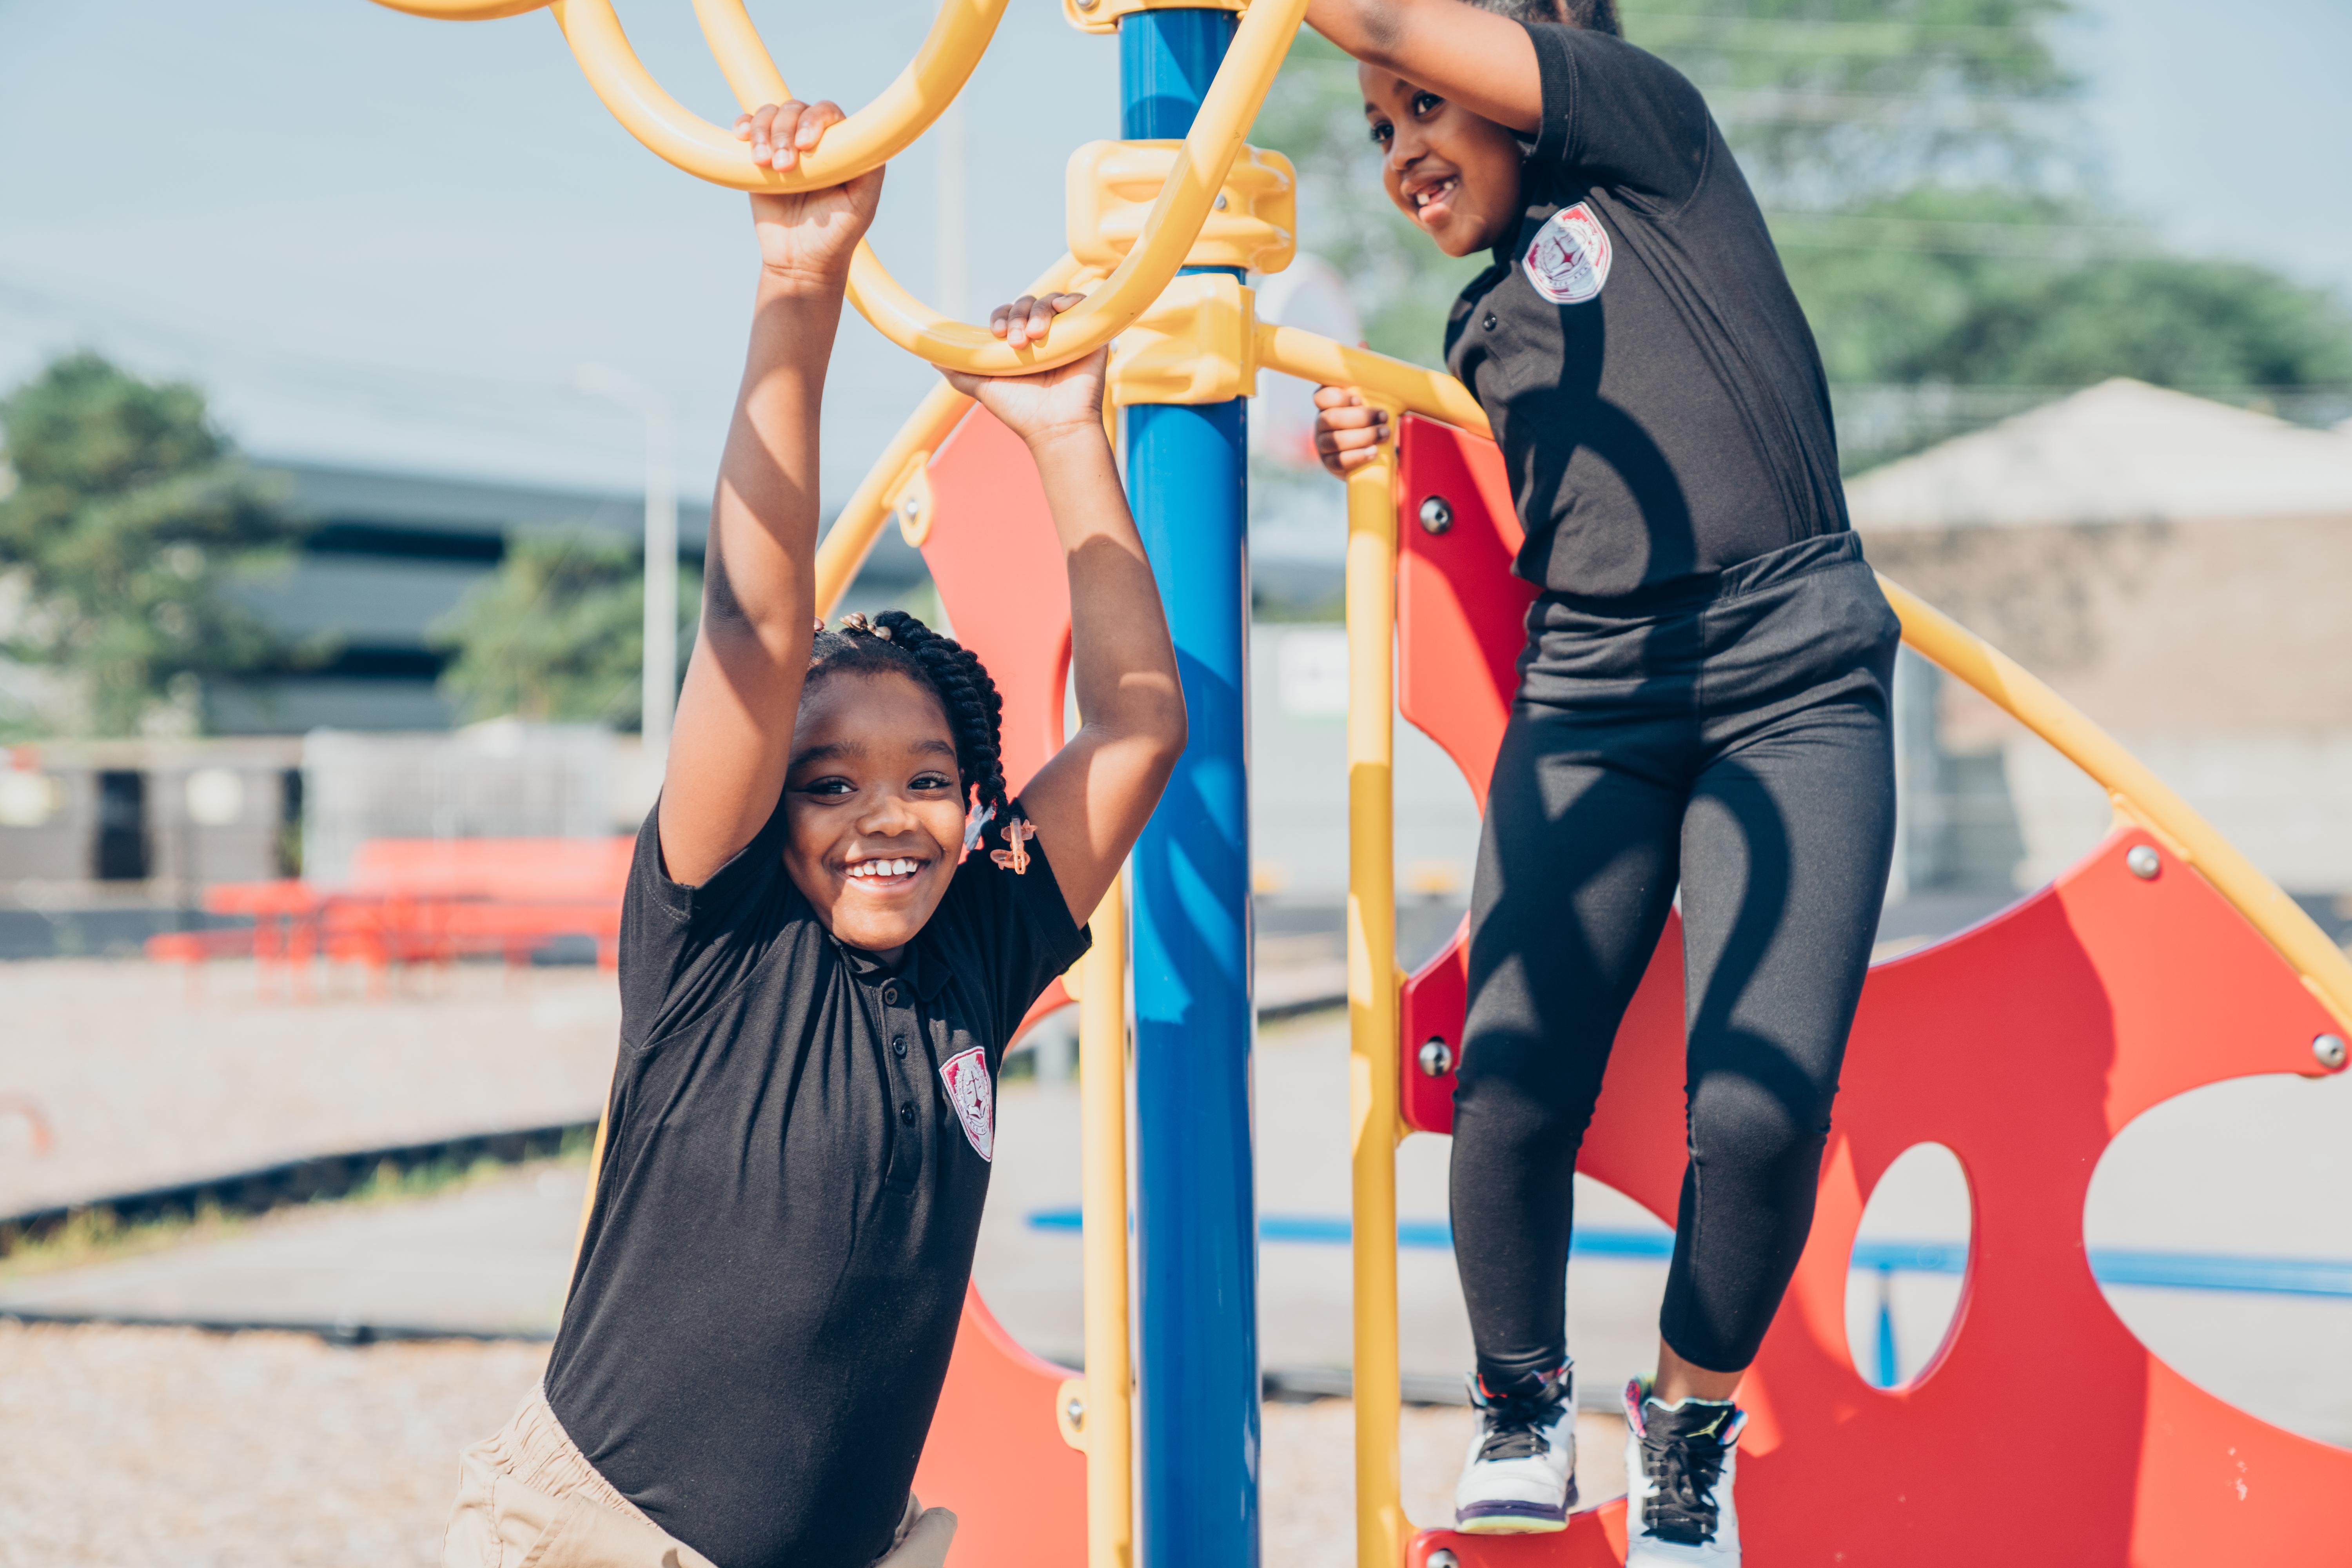 Two PACE Academy students smile while on a colorful play structure on campus.